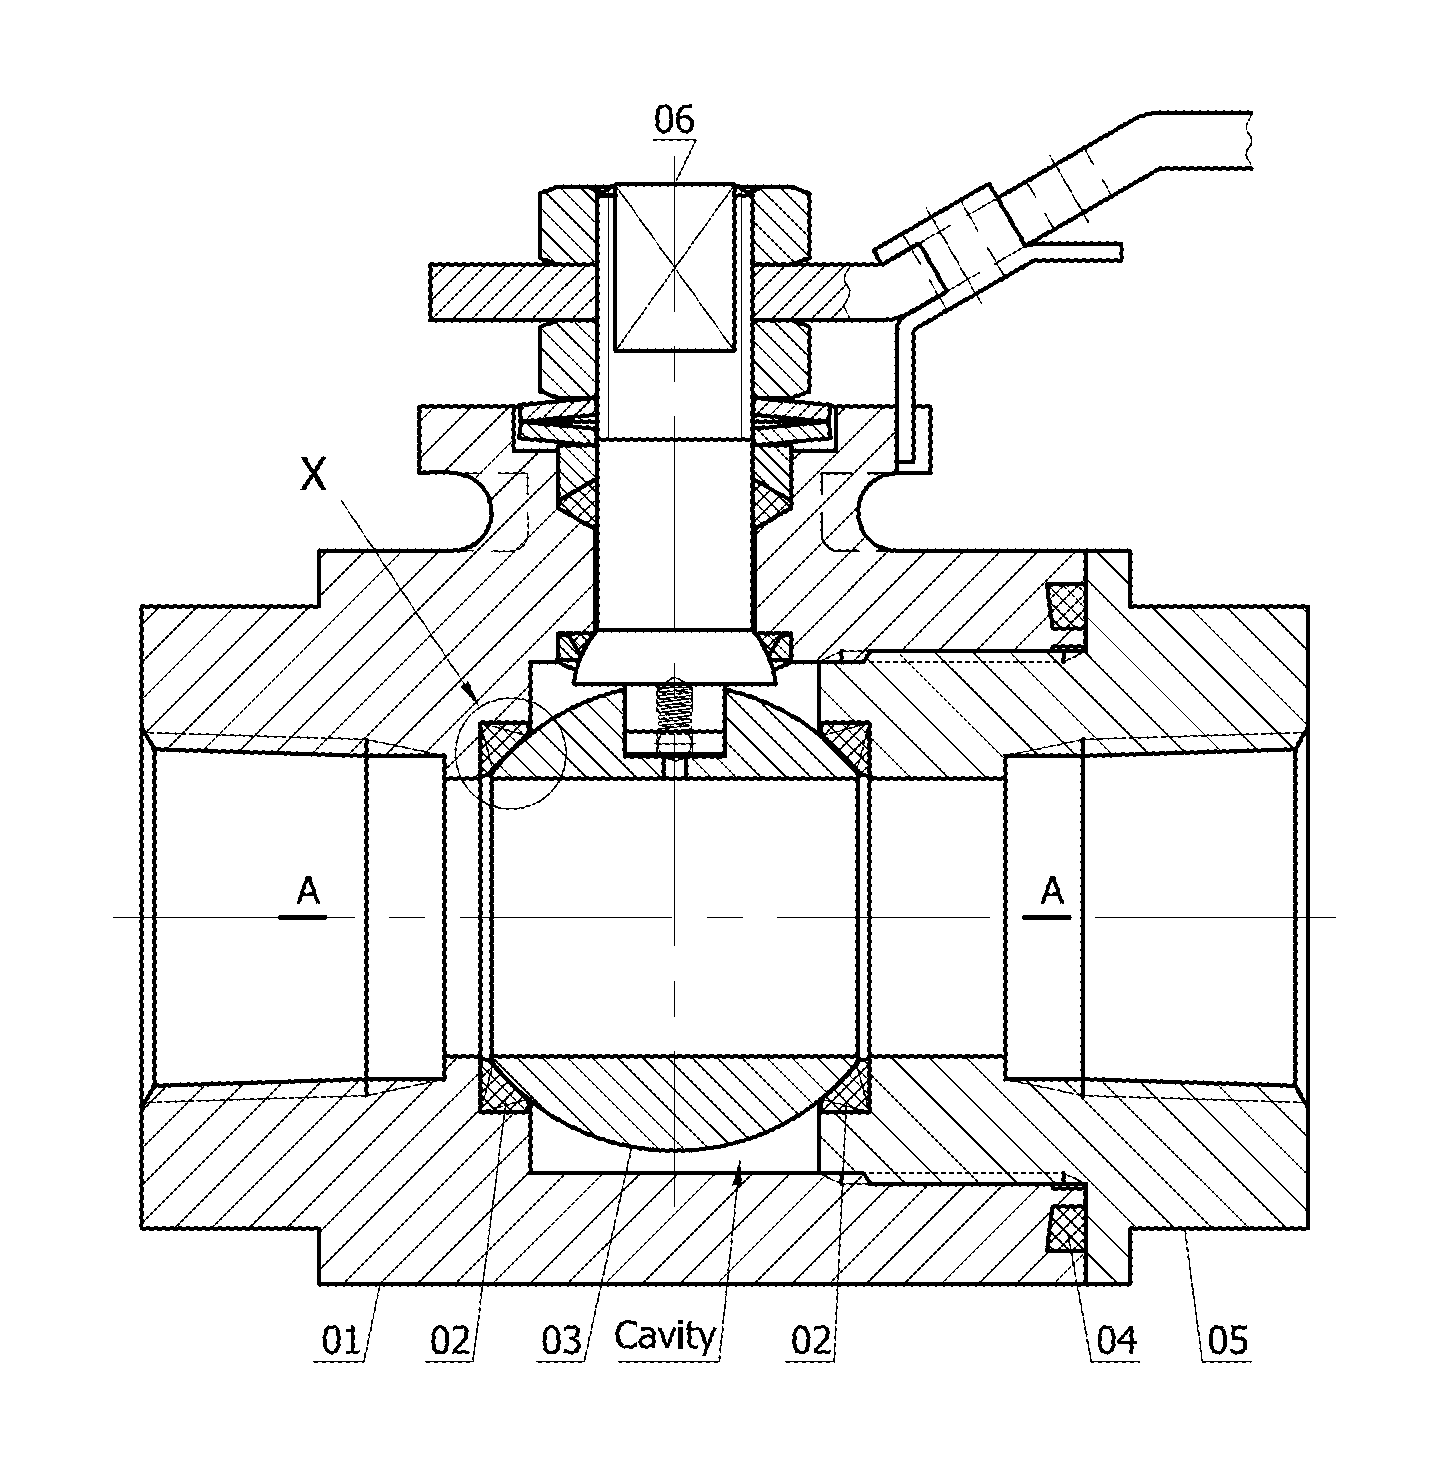 Ball Valve Seats and Ball Valves Designed with Equilateral Triangle Section Methods